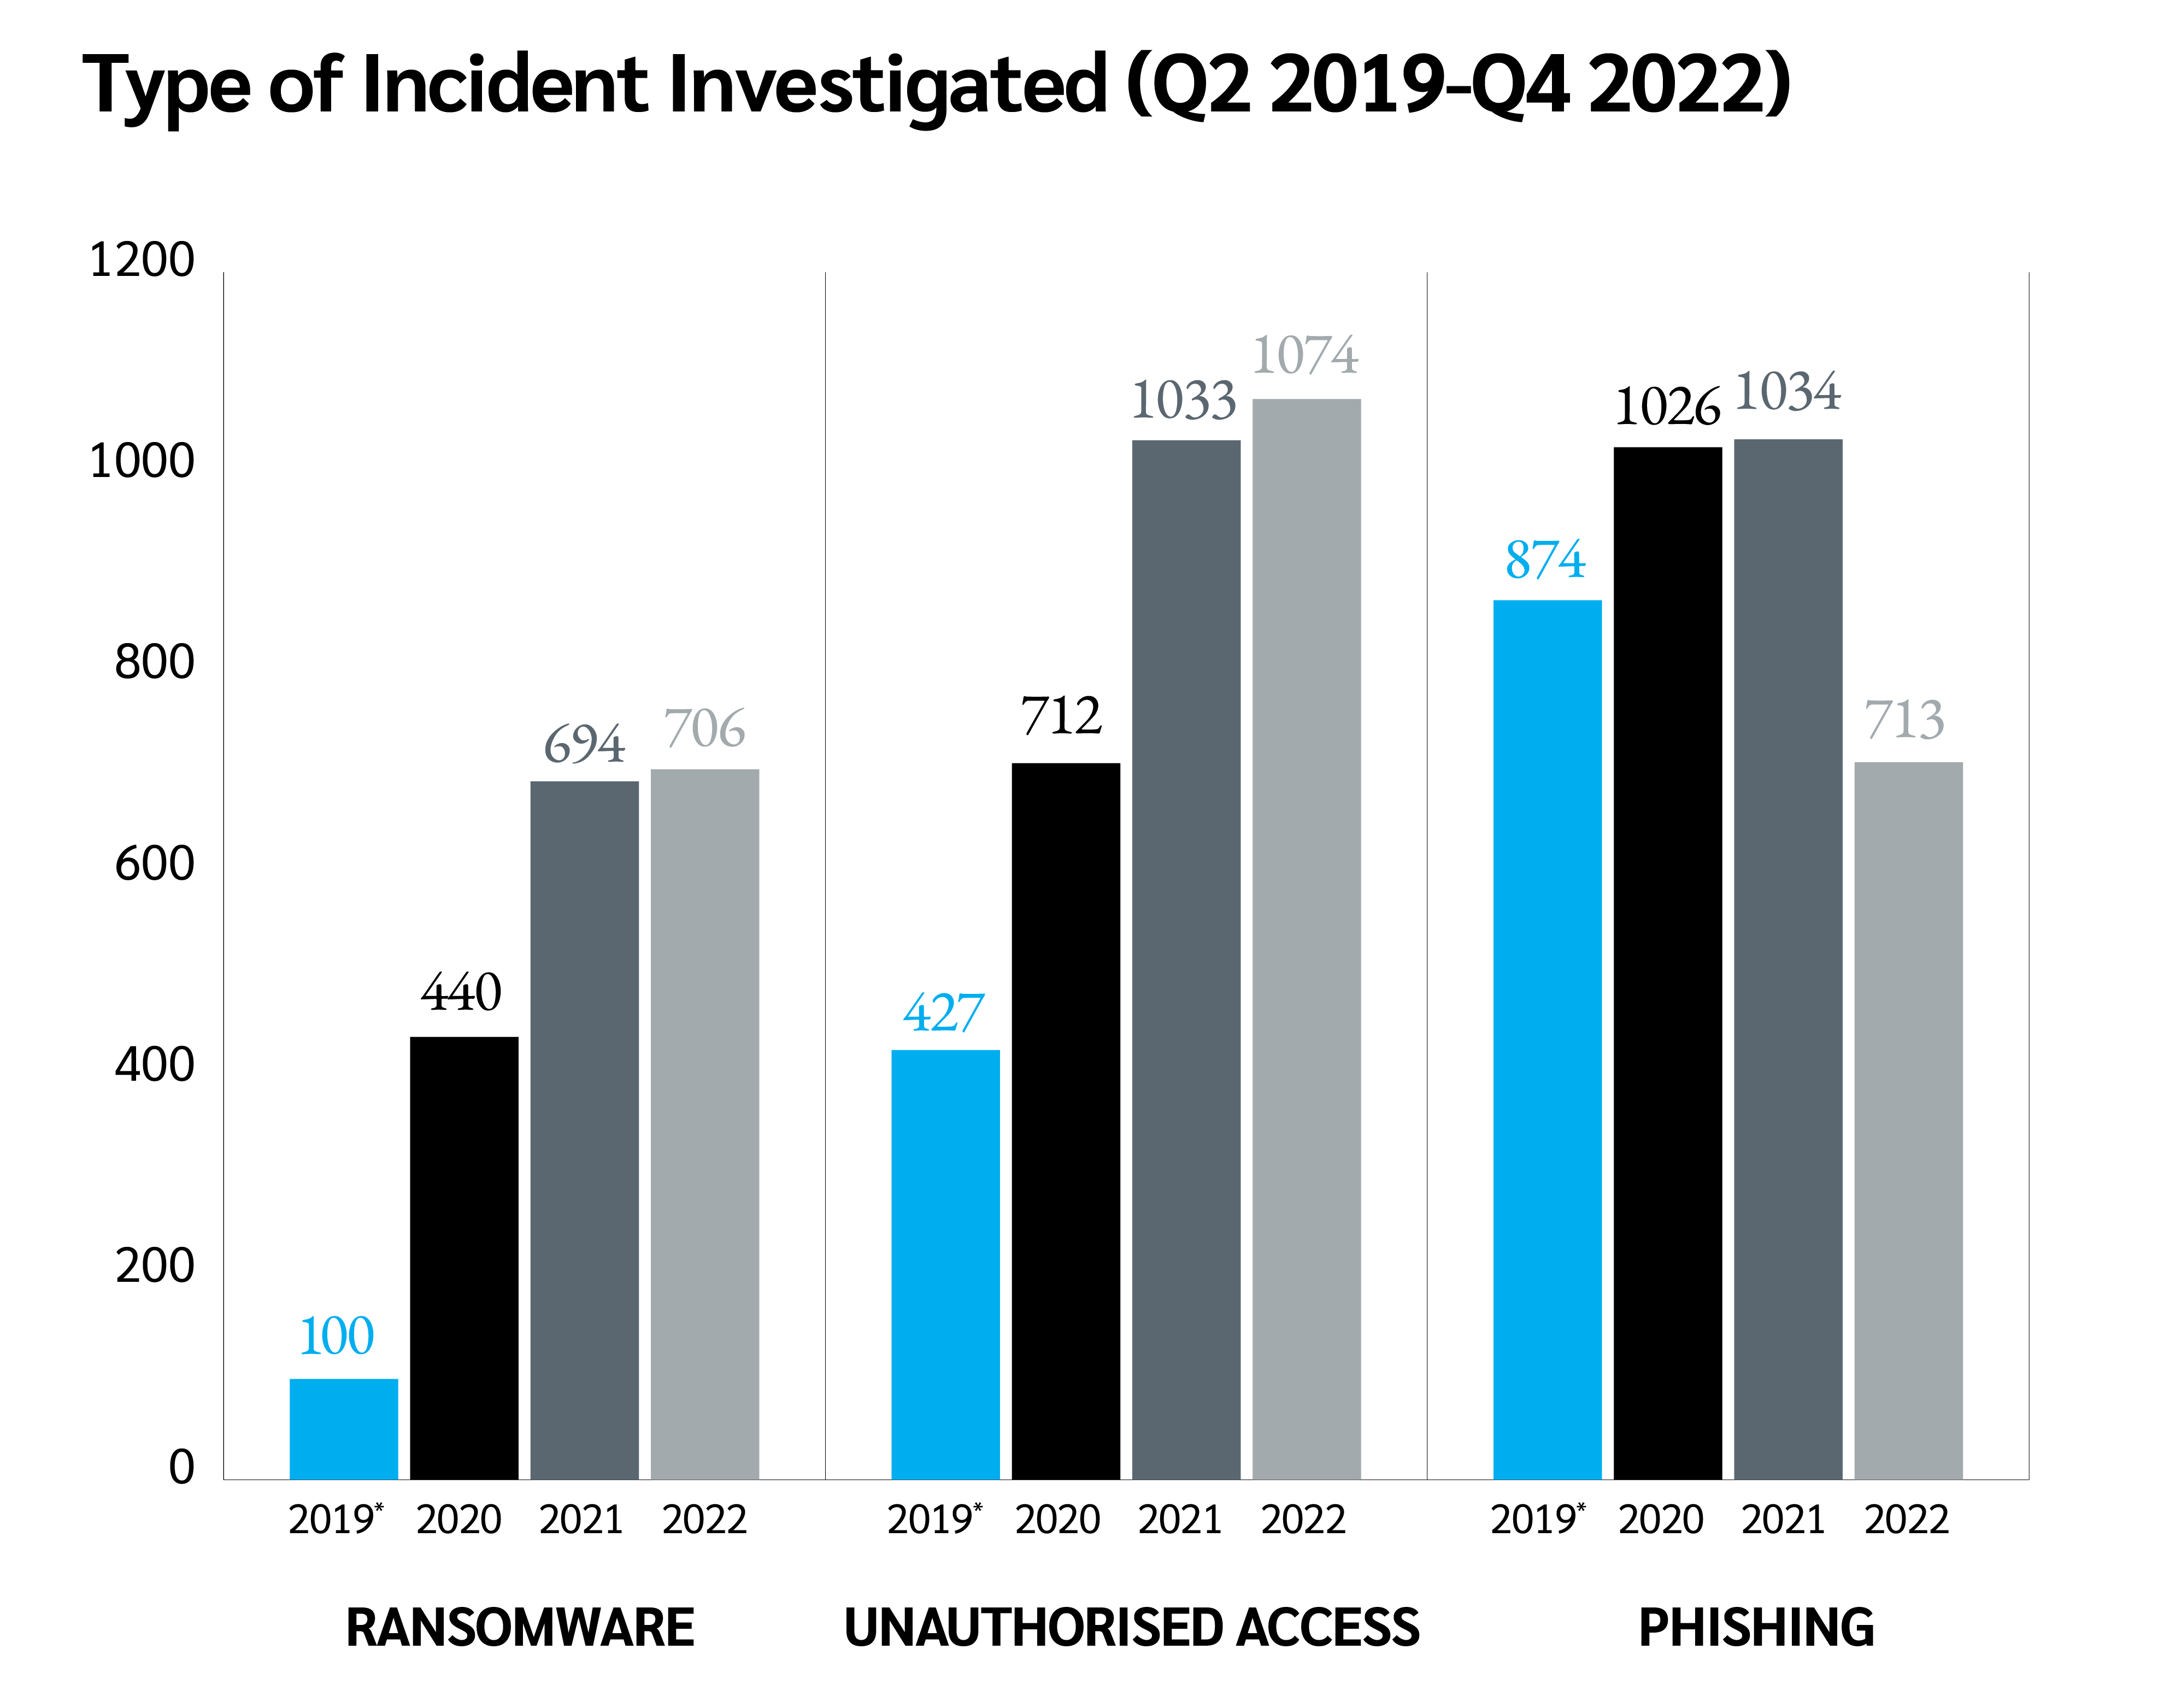 Type of cyber incident investigated 2019-2022 by the ICO in the U.K.